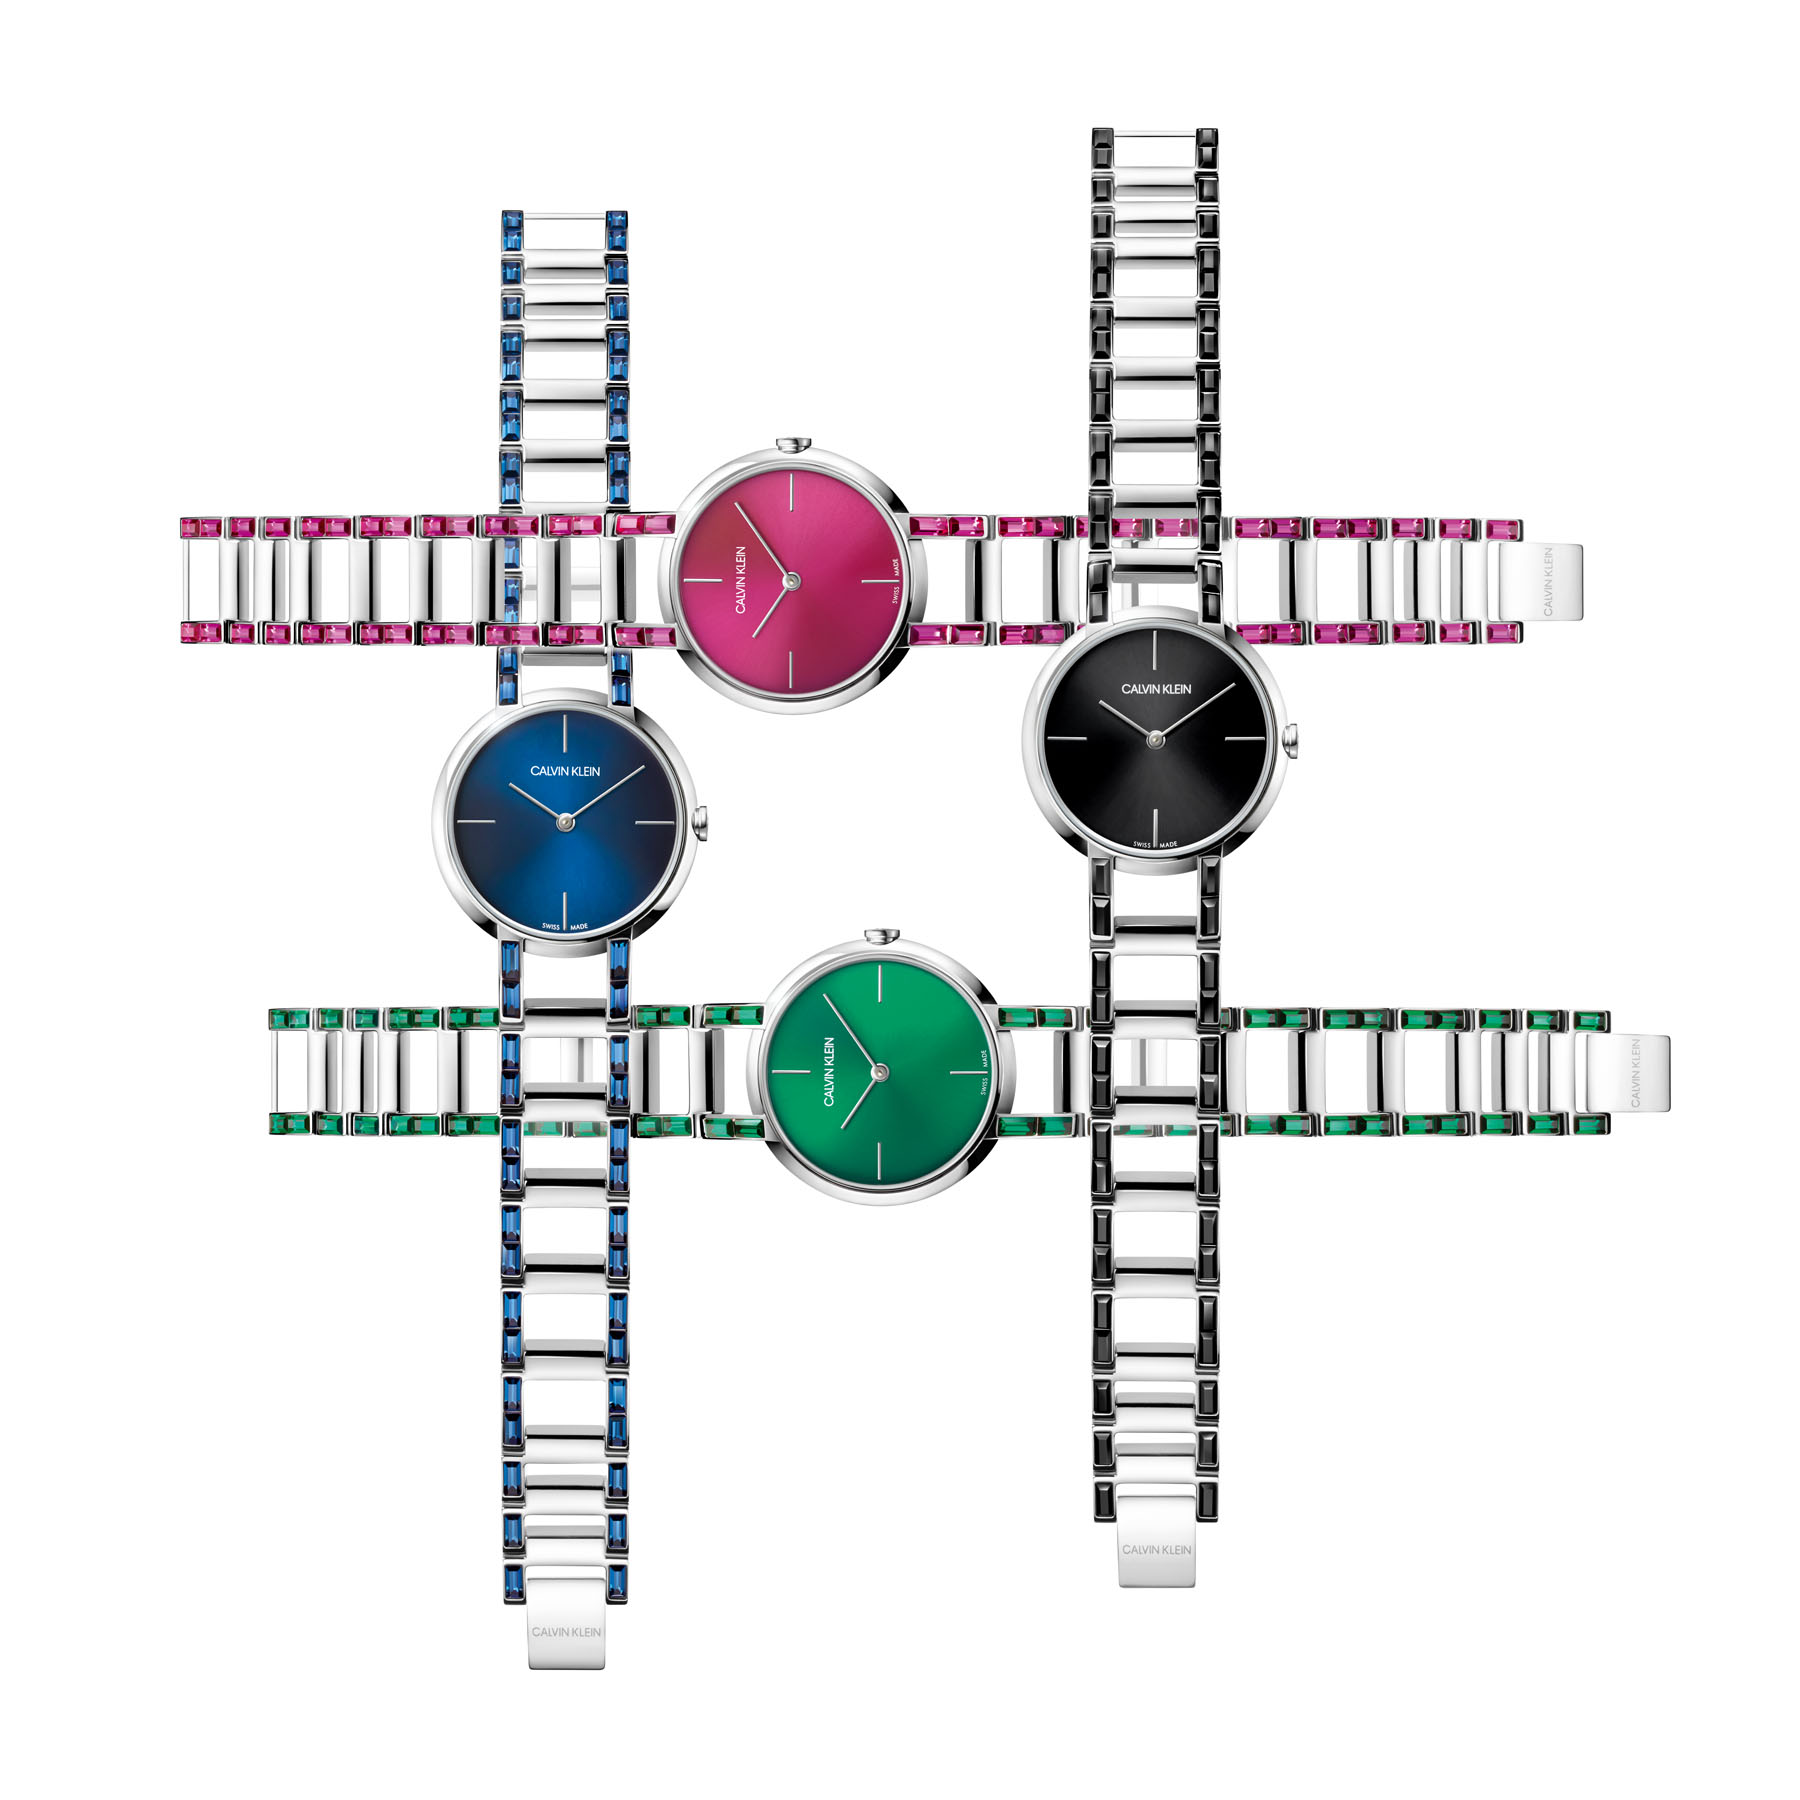 Geometric shapes entwined with a jewellery-inspired bracelet, calling out to the urban American roots. The clean dial is offered in five versions – silver, black, fuchsia pink, Montana blue and emerald green - each of which is framed by a stainless steel articulate bracelet embedded with matching Swarovski stones.